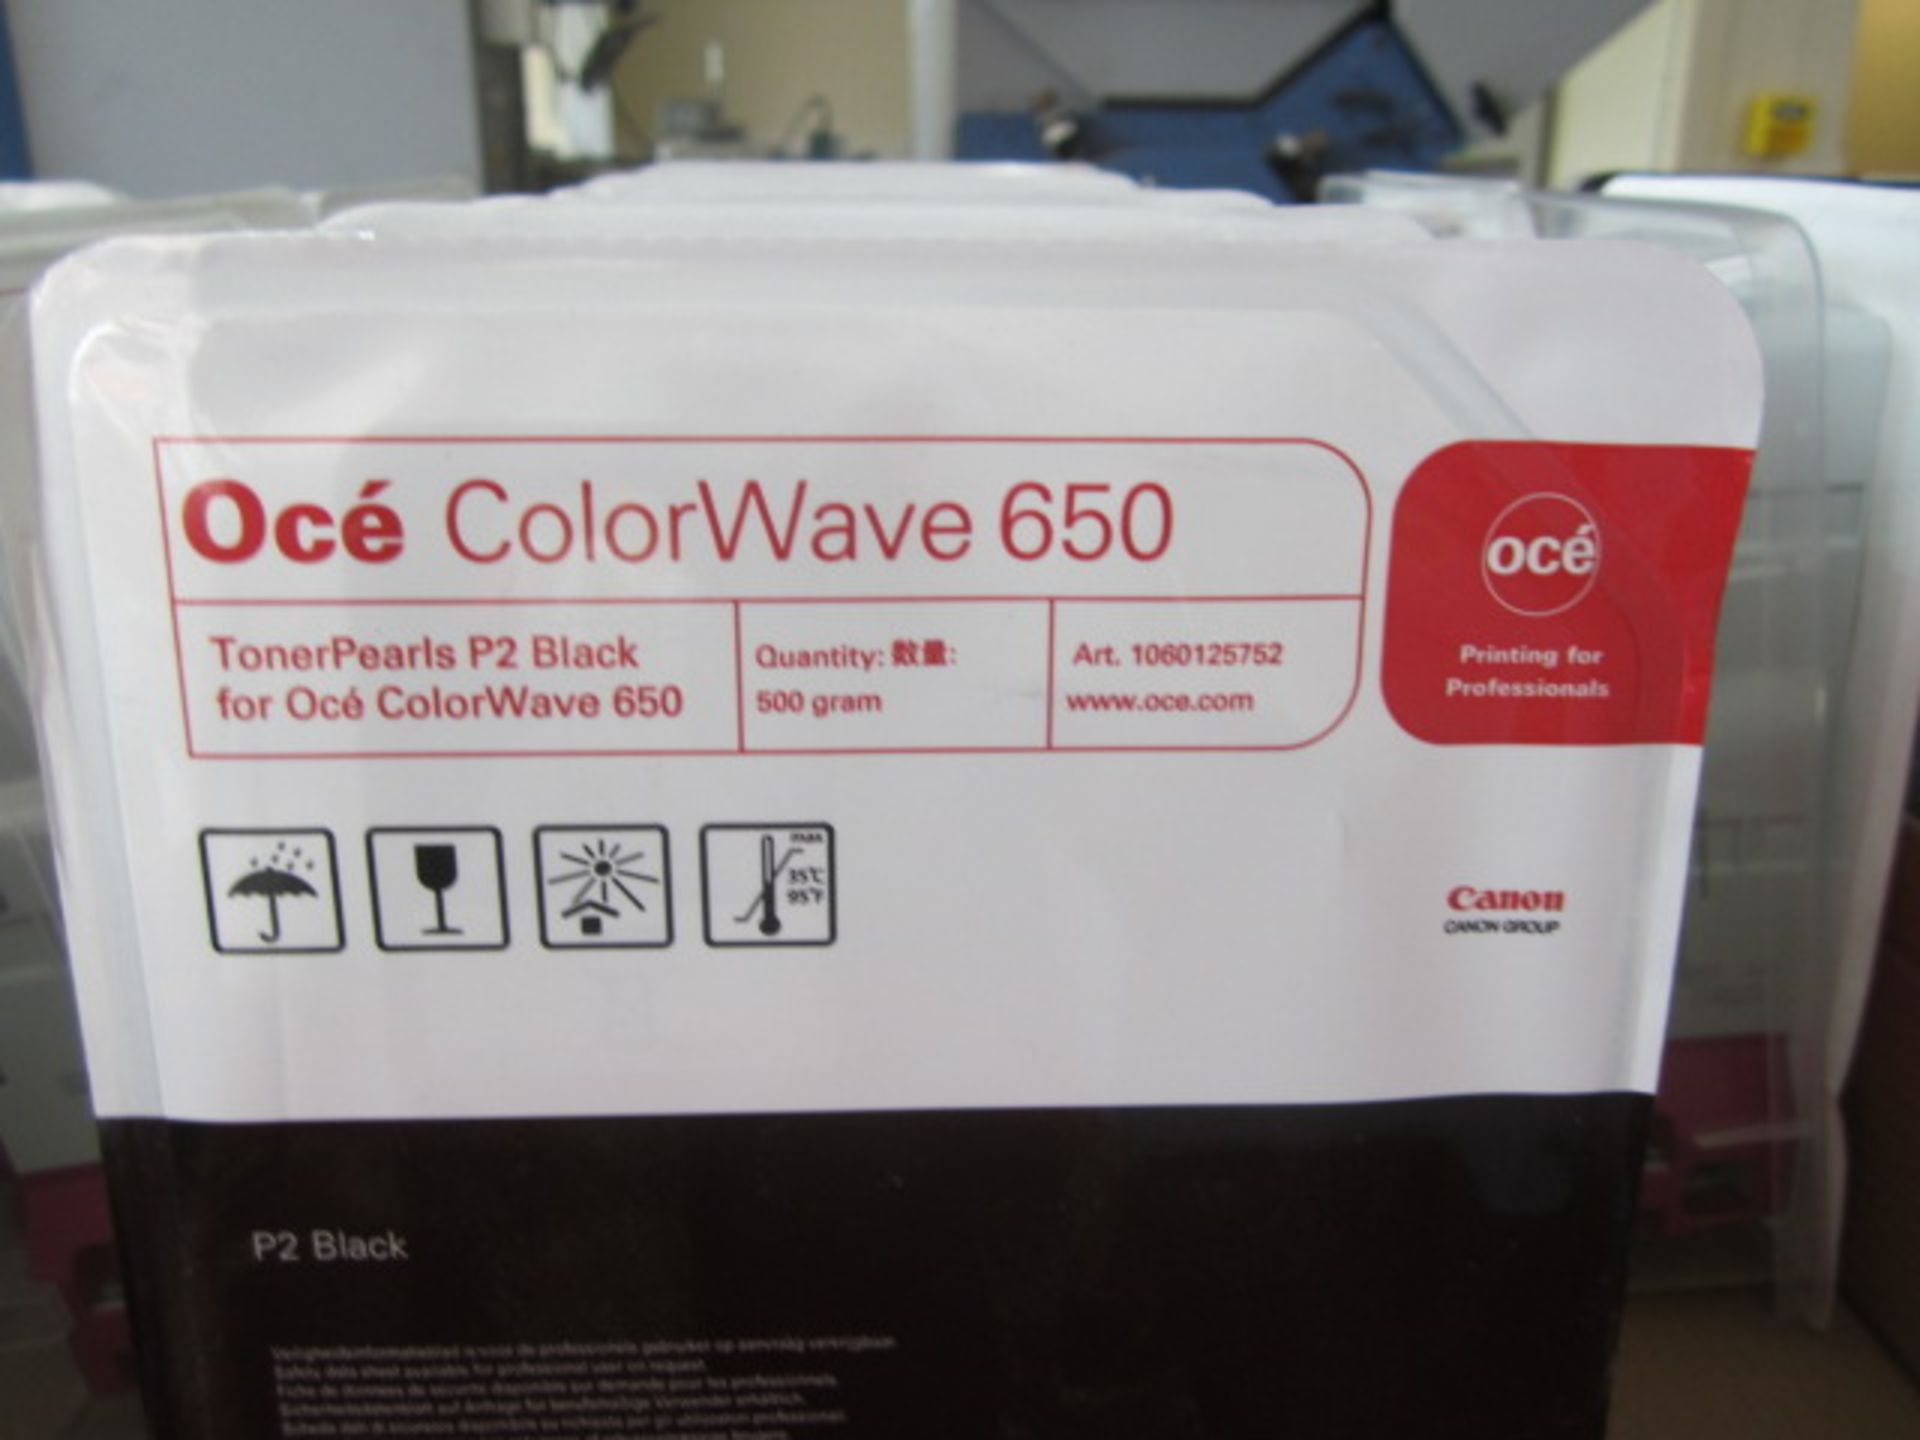 Oce Colorwave 650 Toner Pearl P2 including: 7 x Yellow, 6 x Cyan, 4 x Magenta, 6 x Black. - Lift out - Image 4 of 5